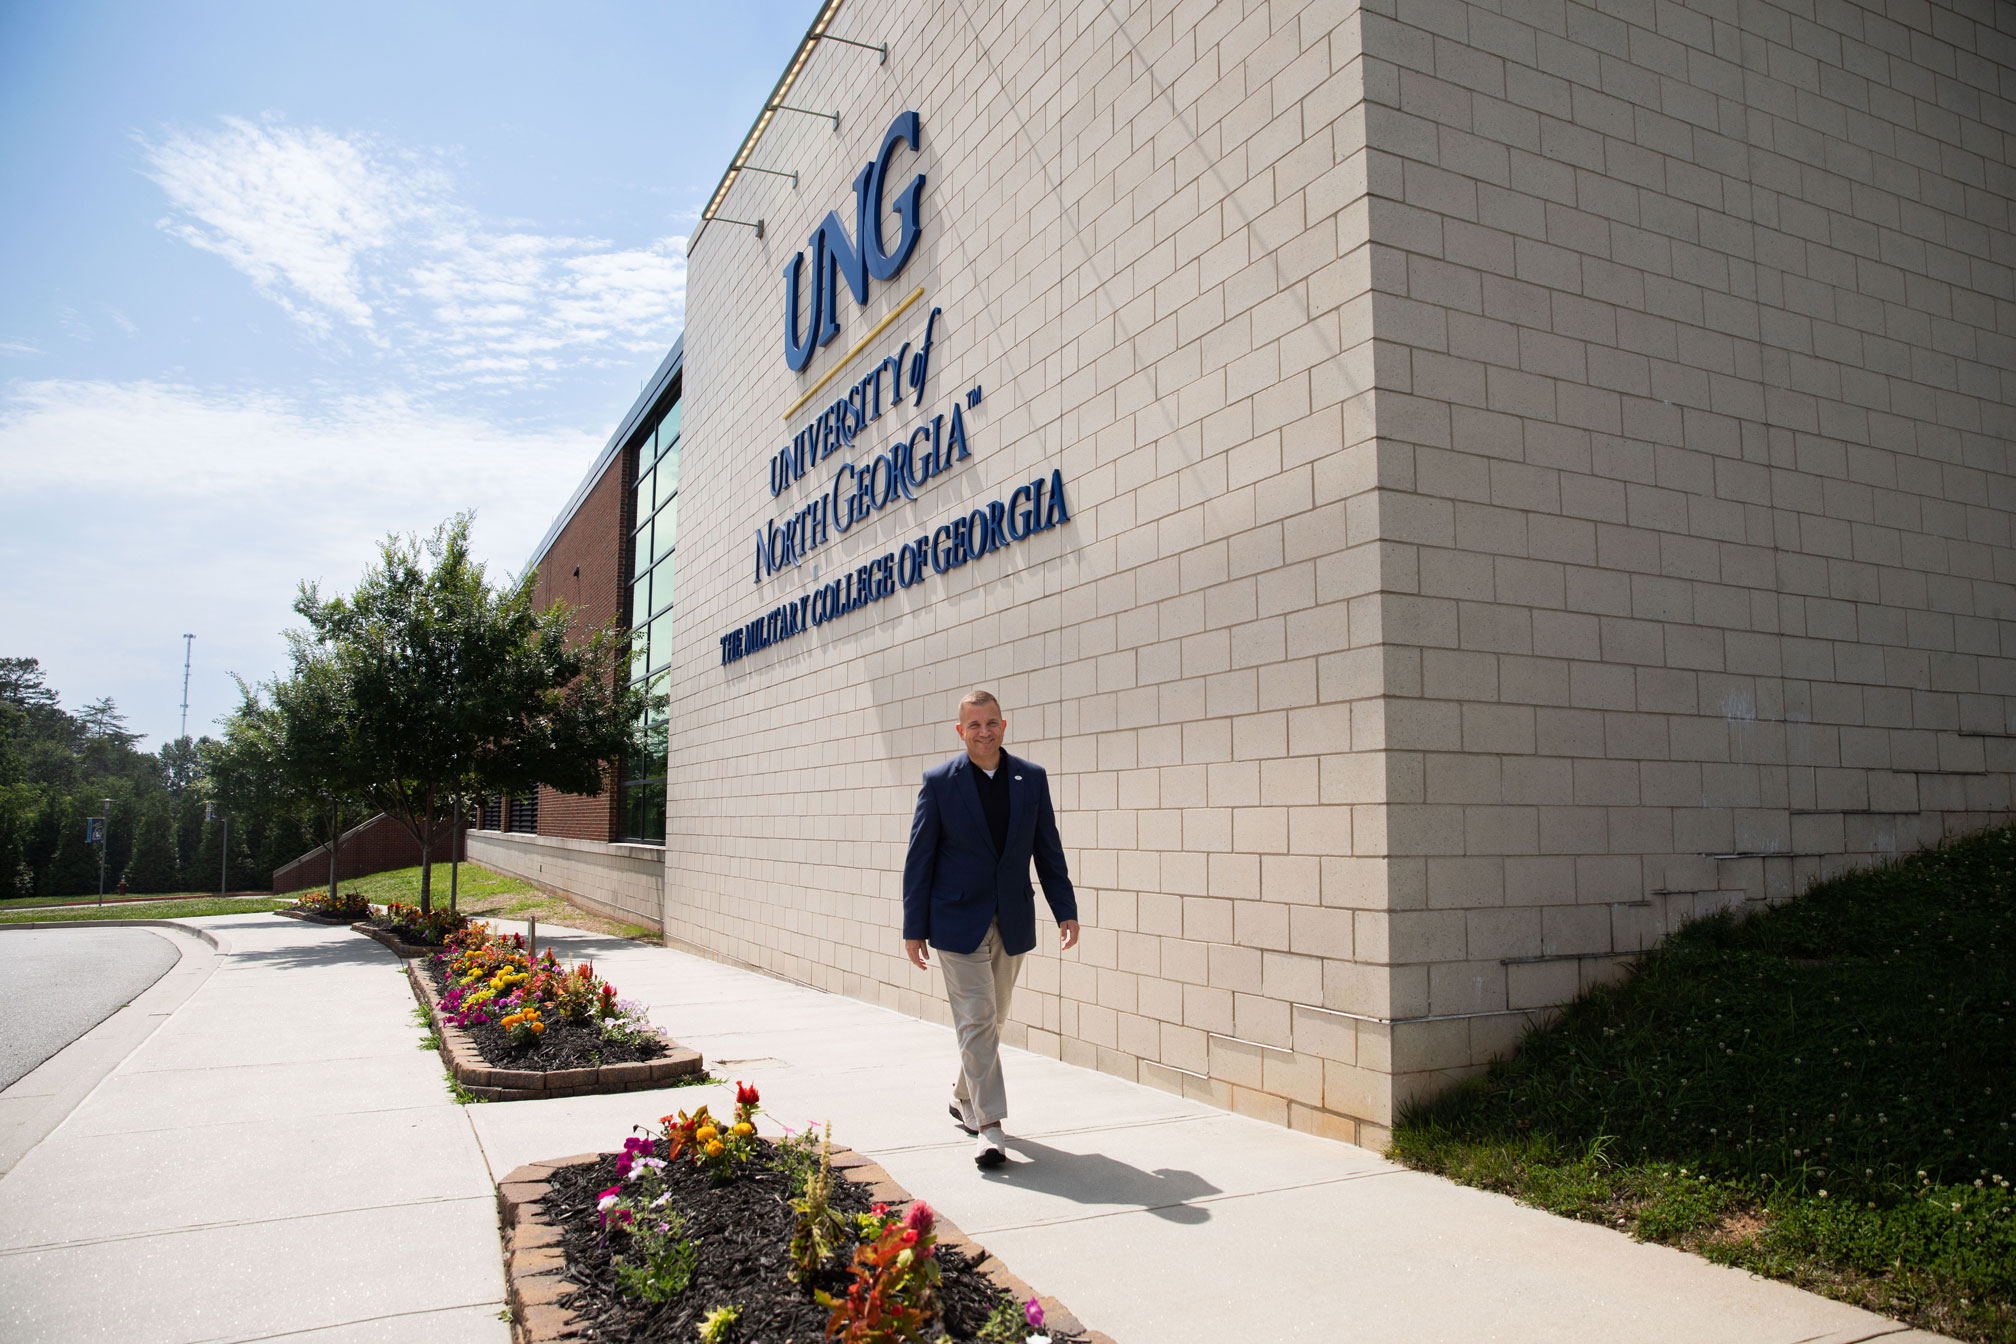 President Shannon walking by the Convocation center